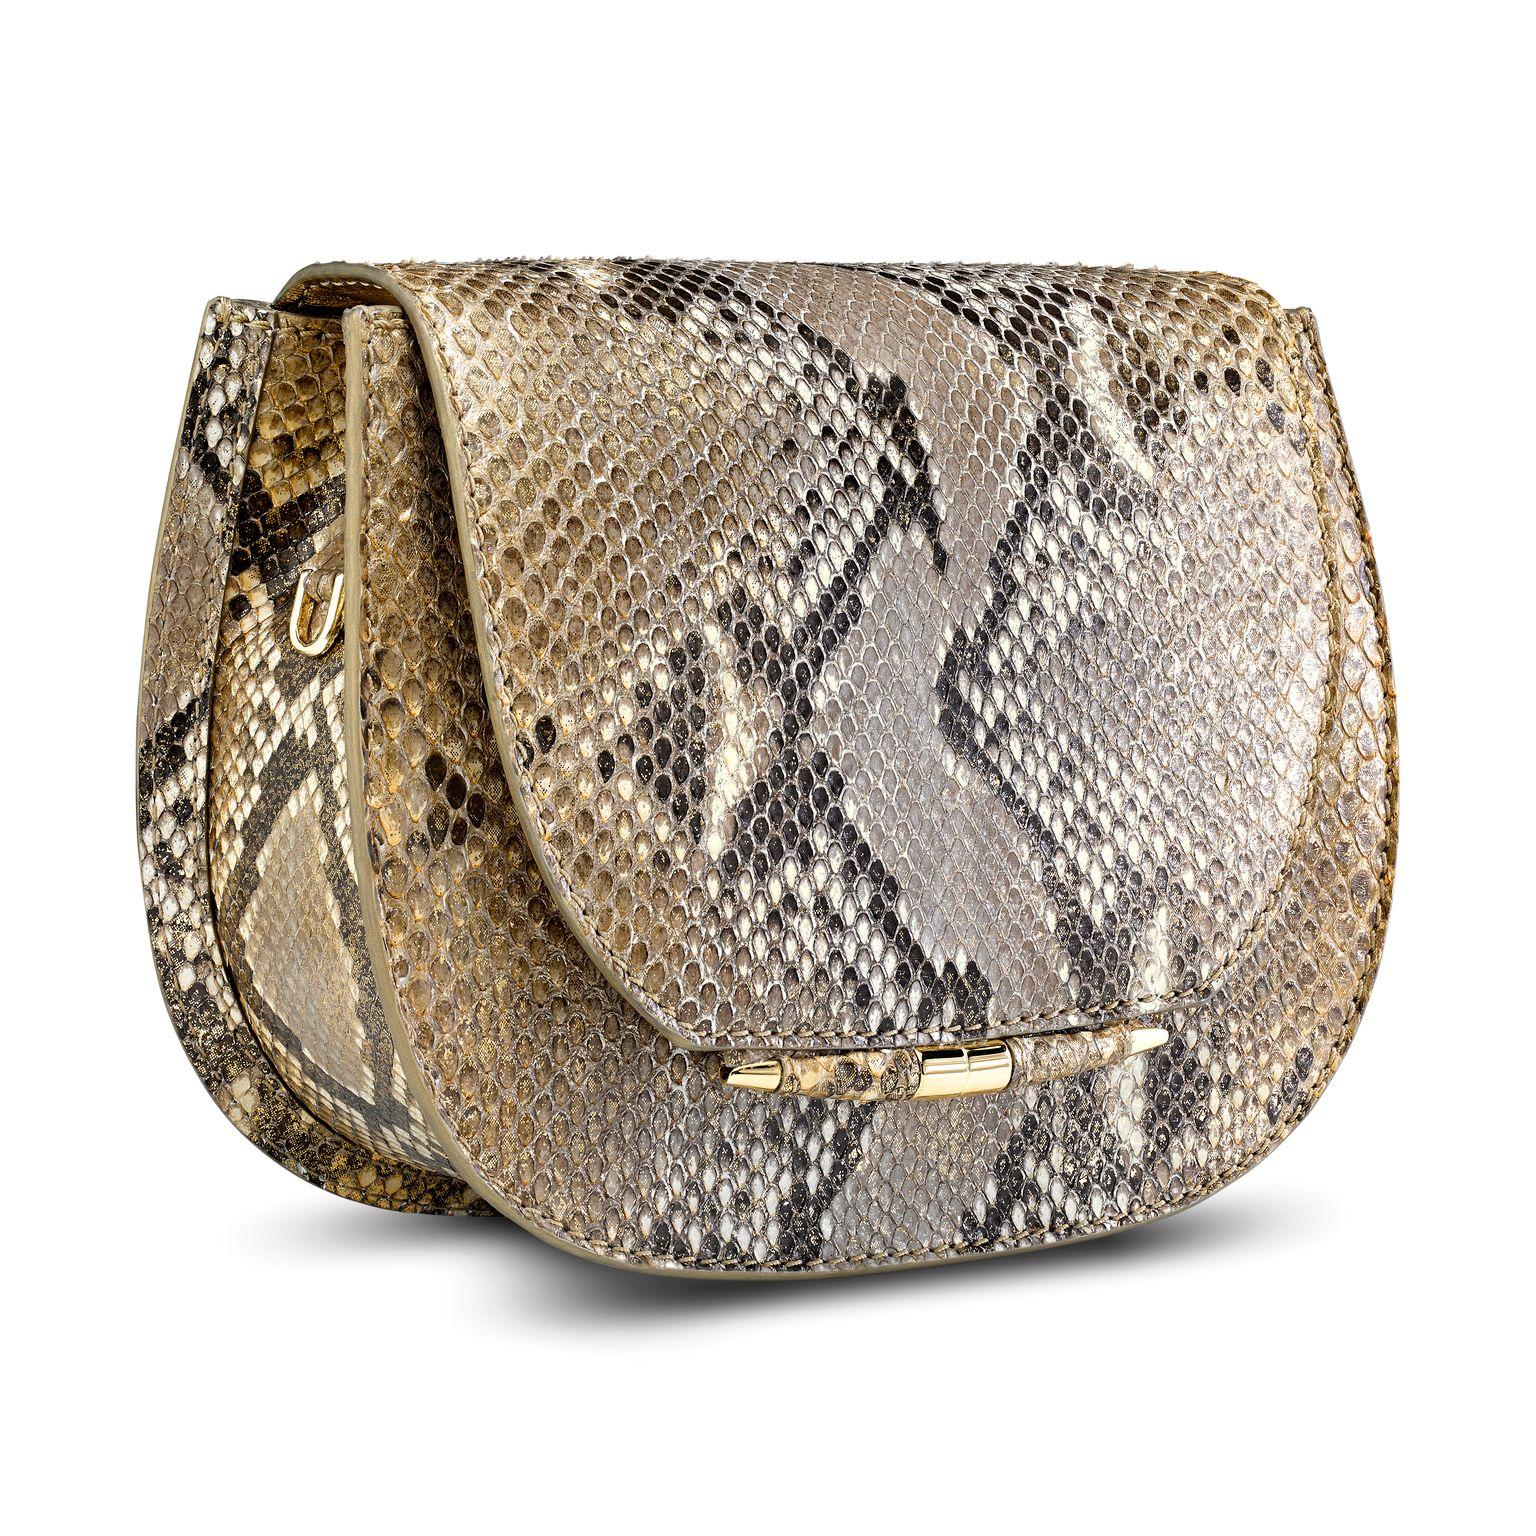 The Jane Saddle Small is featured in Metallic Gold Natural Python with gold hardware. The handbag is designed with a rounded three-quarter front flap, a magnetic snap closure and our custom Infinity Bar. It has a hidden exterior pocket, an optional